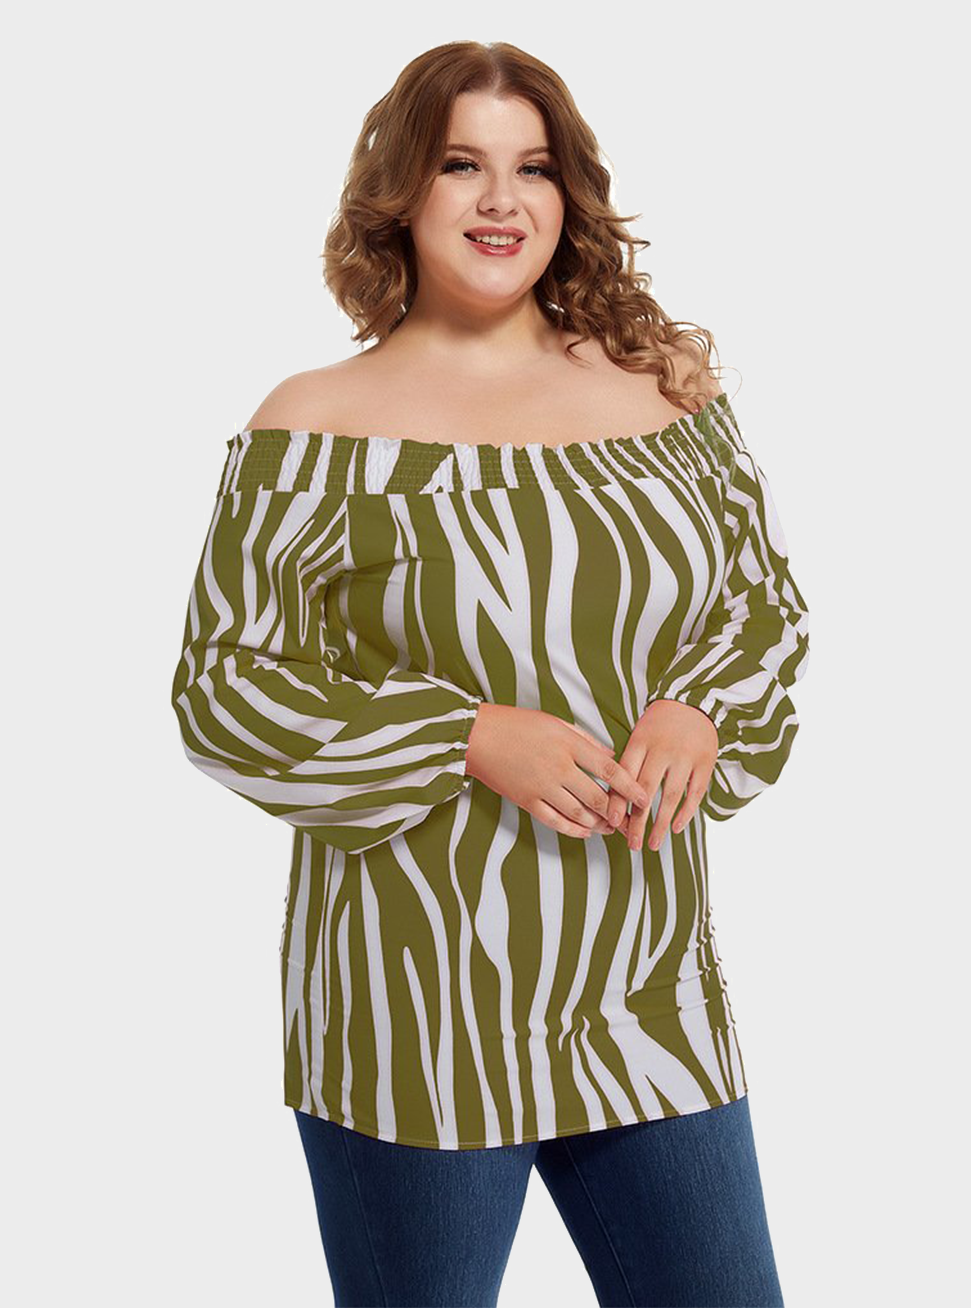 Plus Size One-line Neck And Leaky Shoulder Sexy T-shirt DMladies